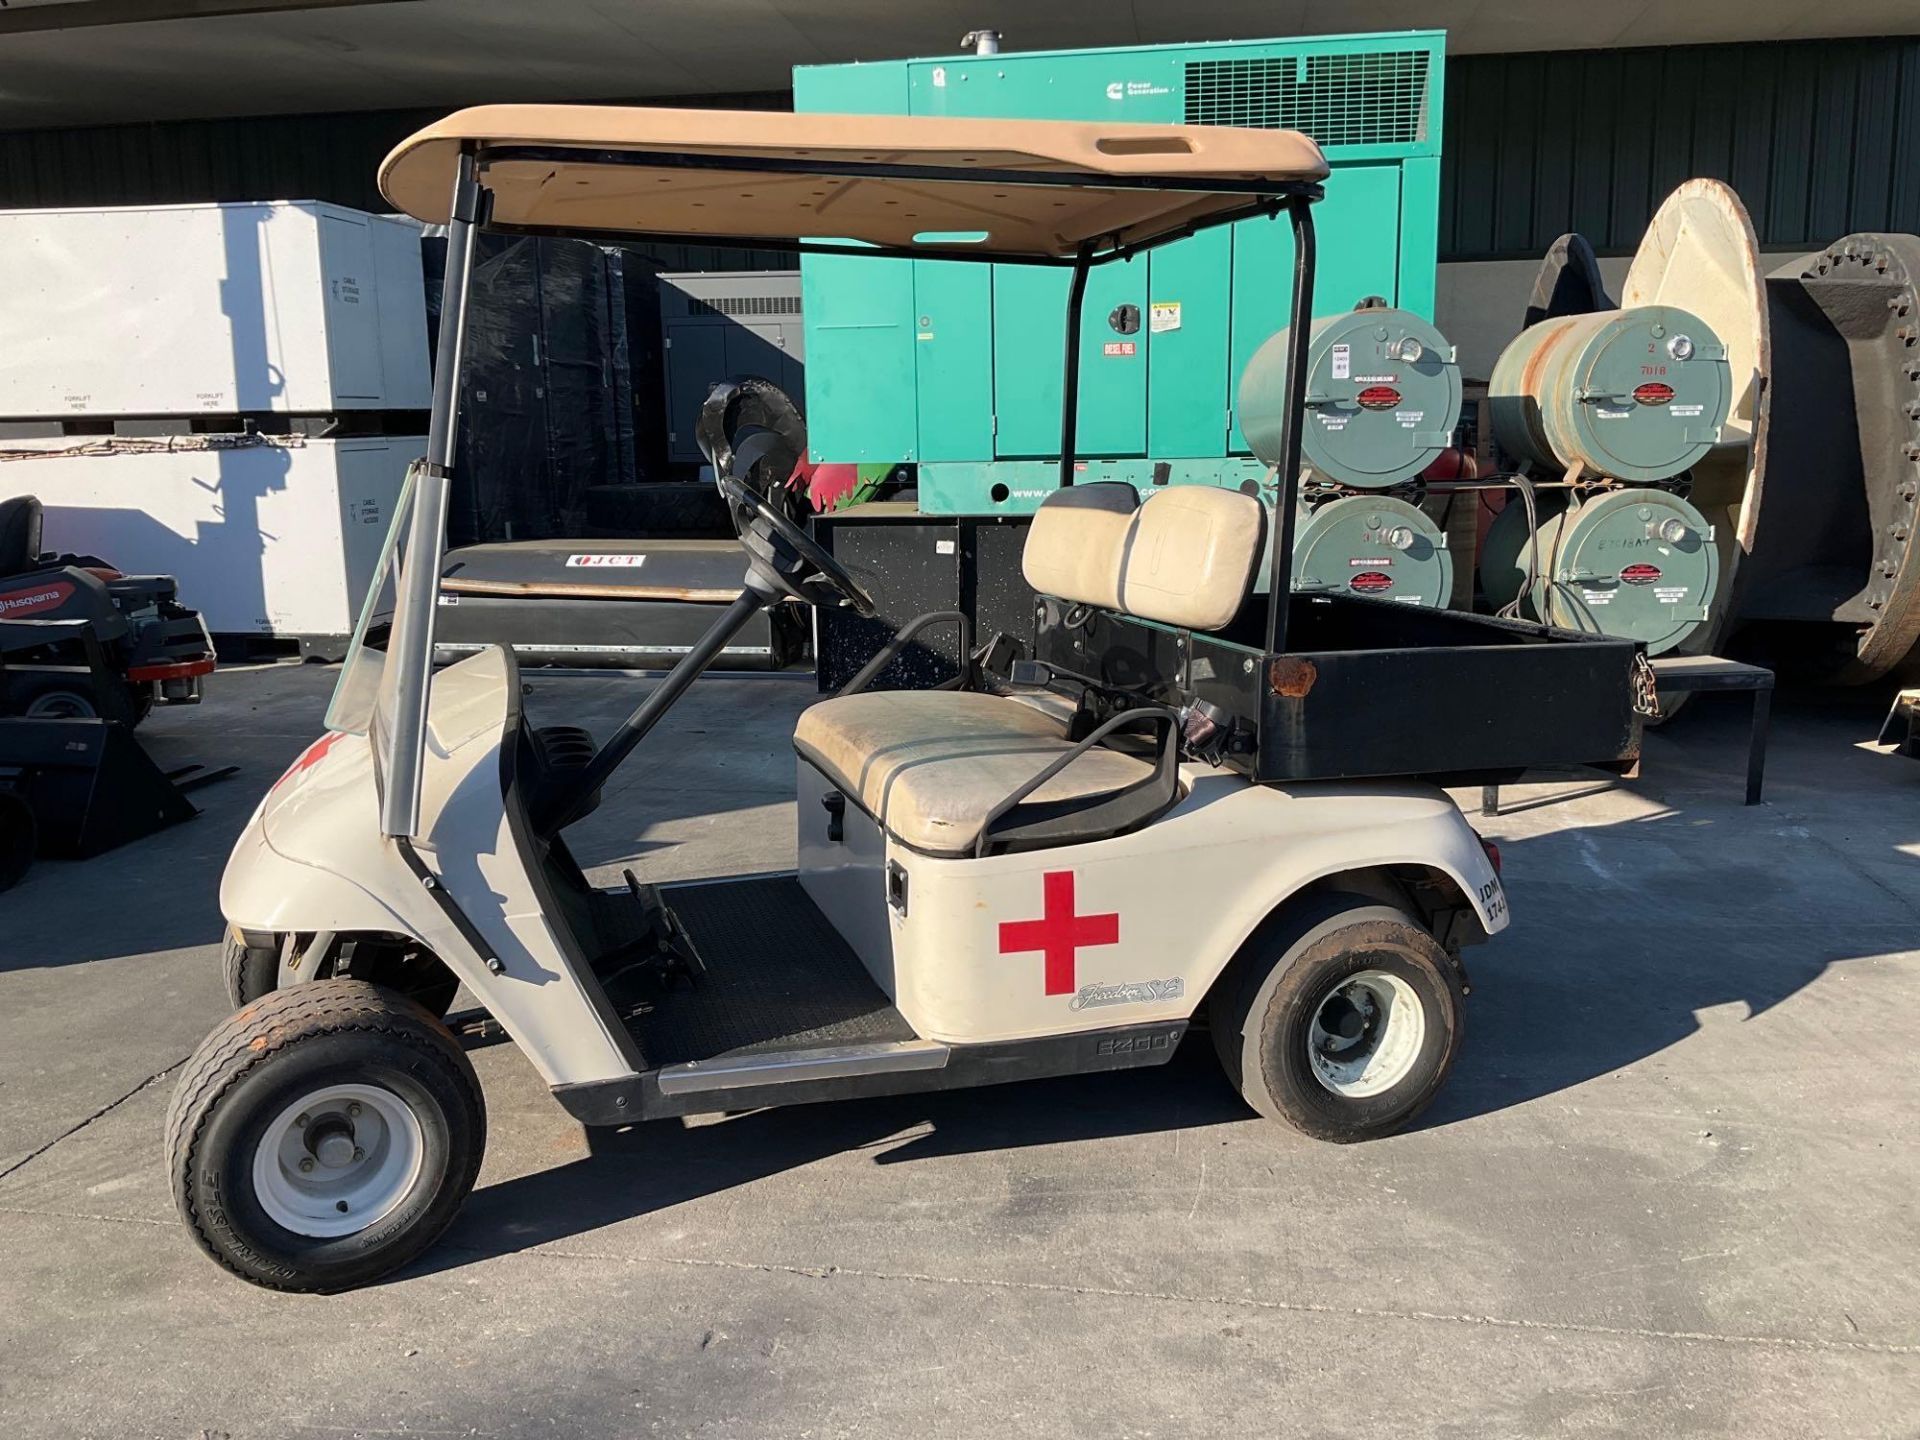 EZ-GO FREEDOM SE TEXTRON GOLF CART MODEL TXTEF SE, ELECTRIC, UTILITY/STORAGE BED, BILL OF SALE ONLY, - Image 2 of 11